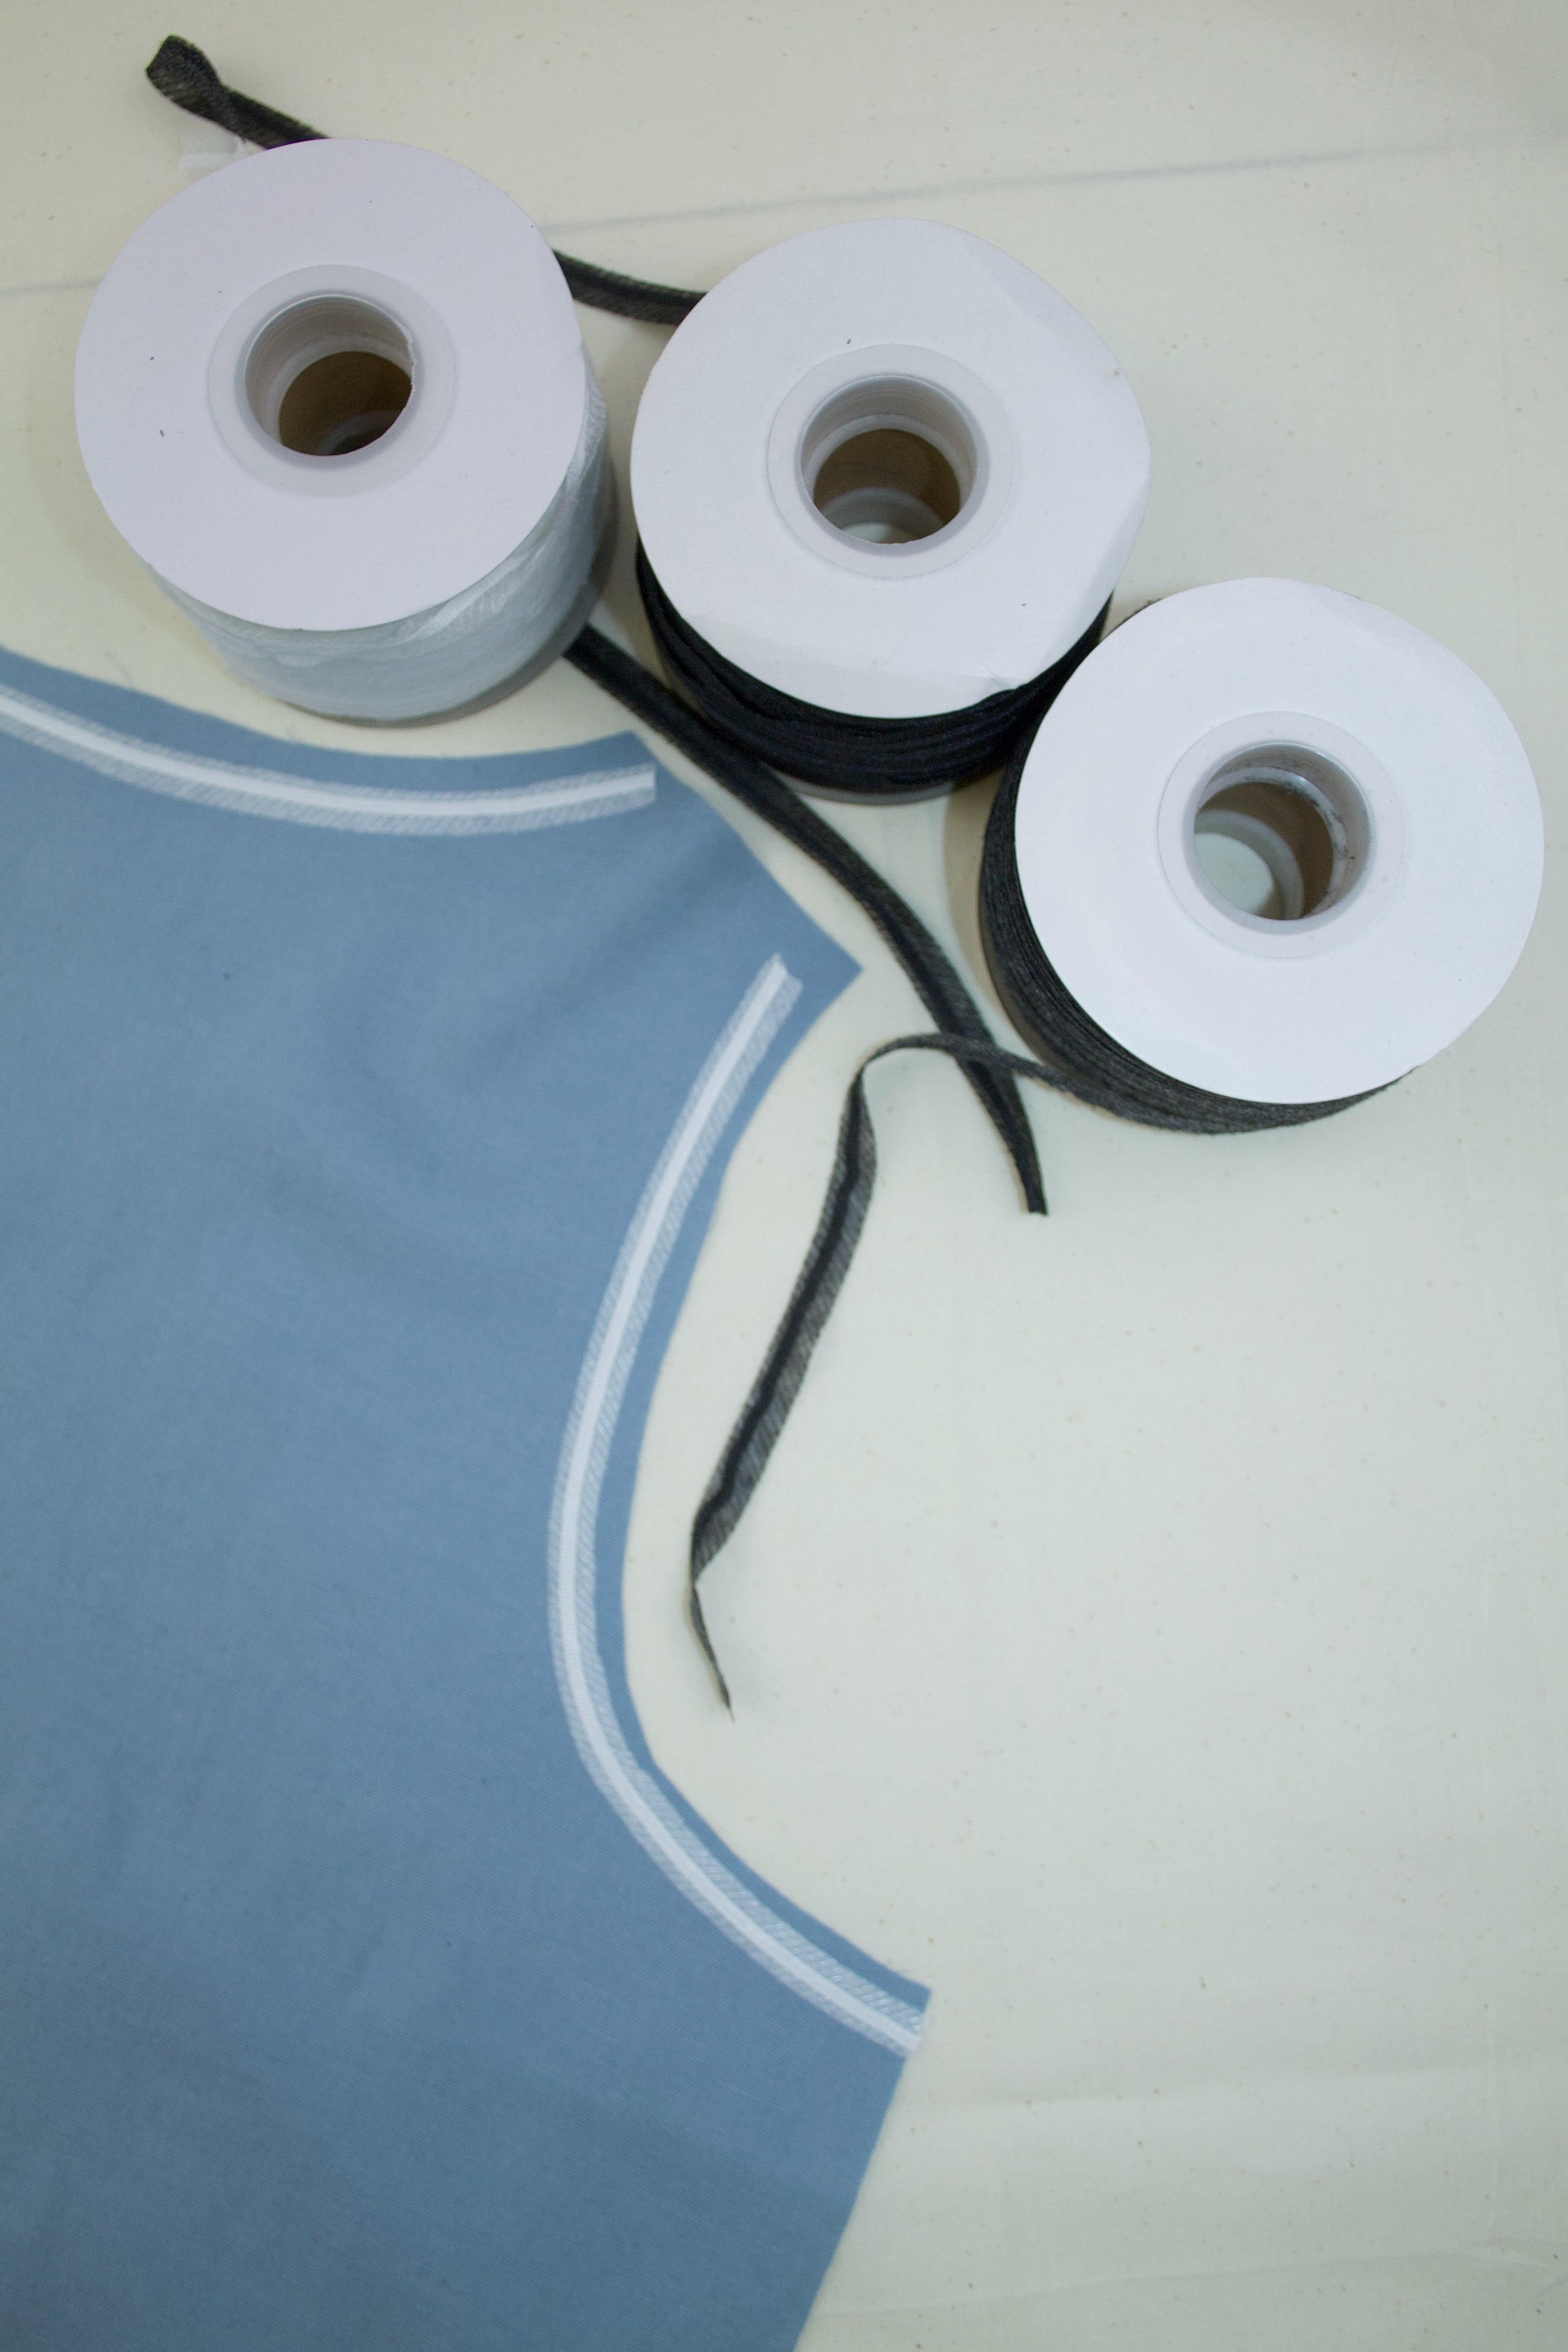 How to make your own stay tape for stabilising seams – Pattern Fantastique